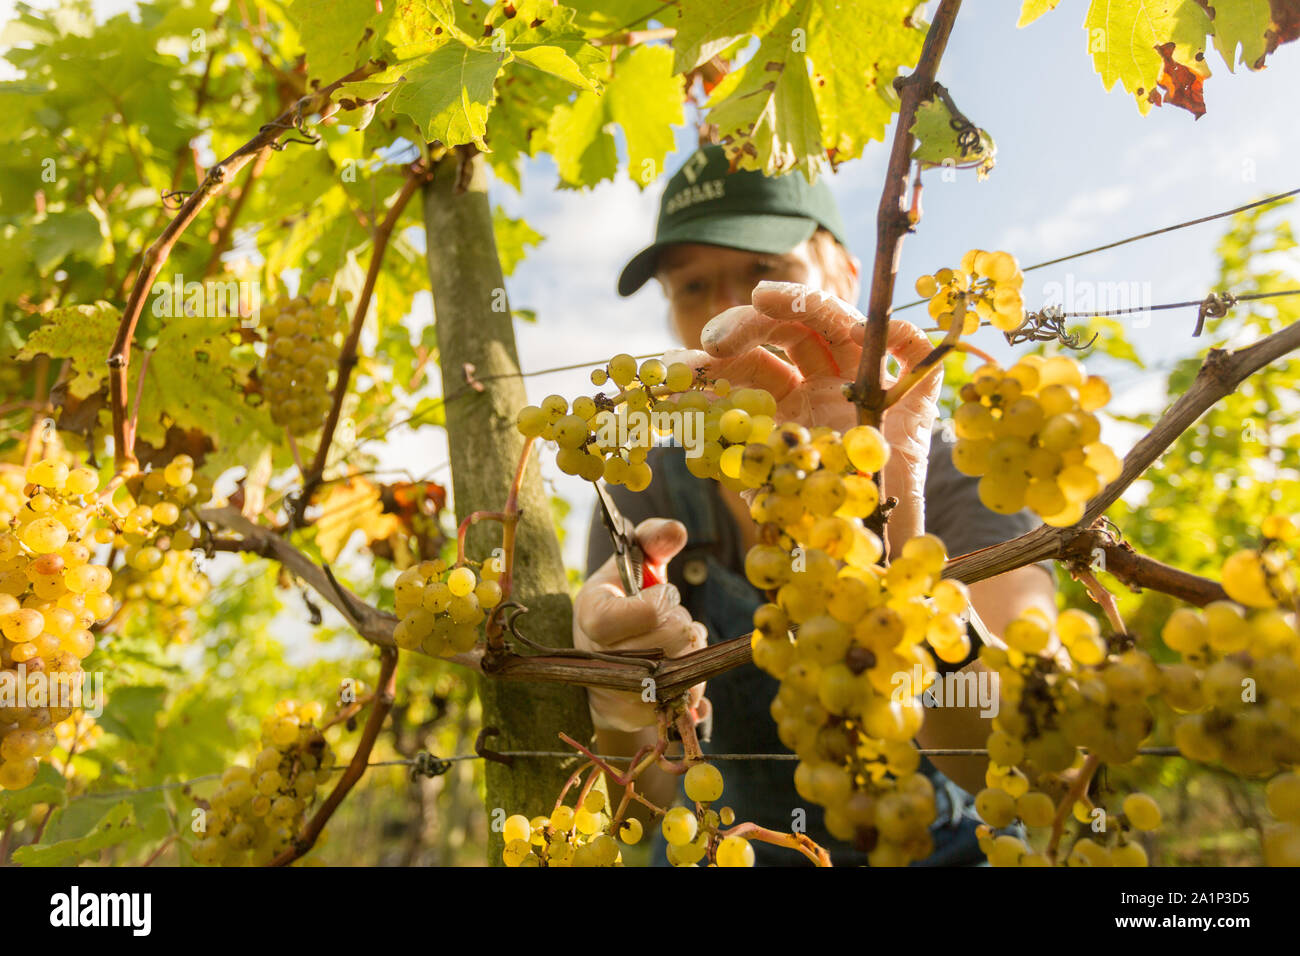 Astley, Worcestershire, UK. 28th September 2019. Volunteers begin the annual grape harvest at Astley Vineyard near Stourport-on-Severn, Worcestershire. One of Britain's oldest and most northerly vineyards, the family-run Astley Vineyard was established in 1971 and is a single estate. Its estate bottling plant is expected to produce around 10,000 bottles. Volunteer Daisy Haywood is currently picking the Madeleine Angevine - an almost UK exclusive grape variety. Peter Lopeman/Alamy Live News Stock Photo